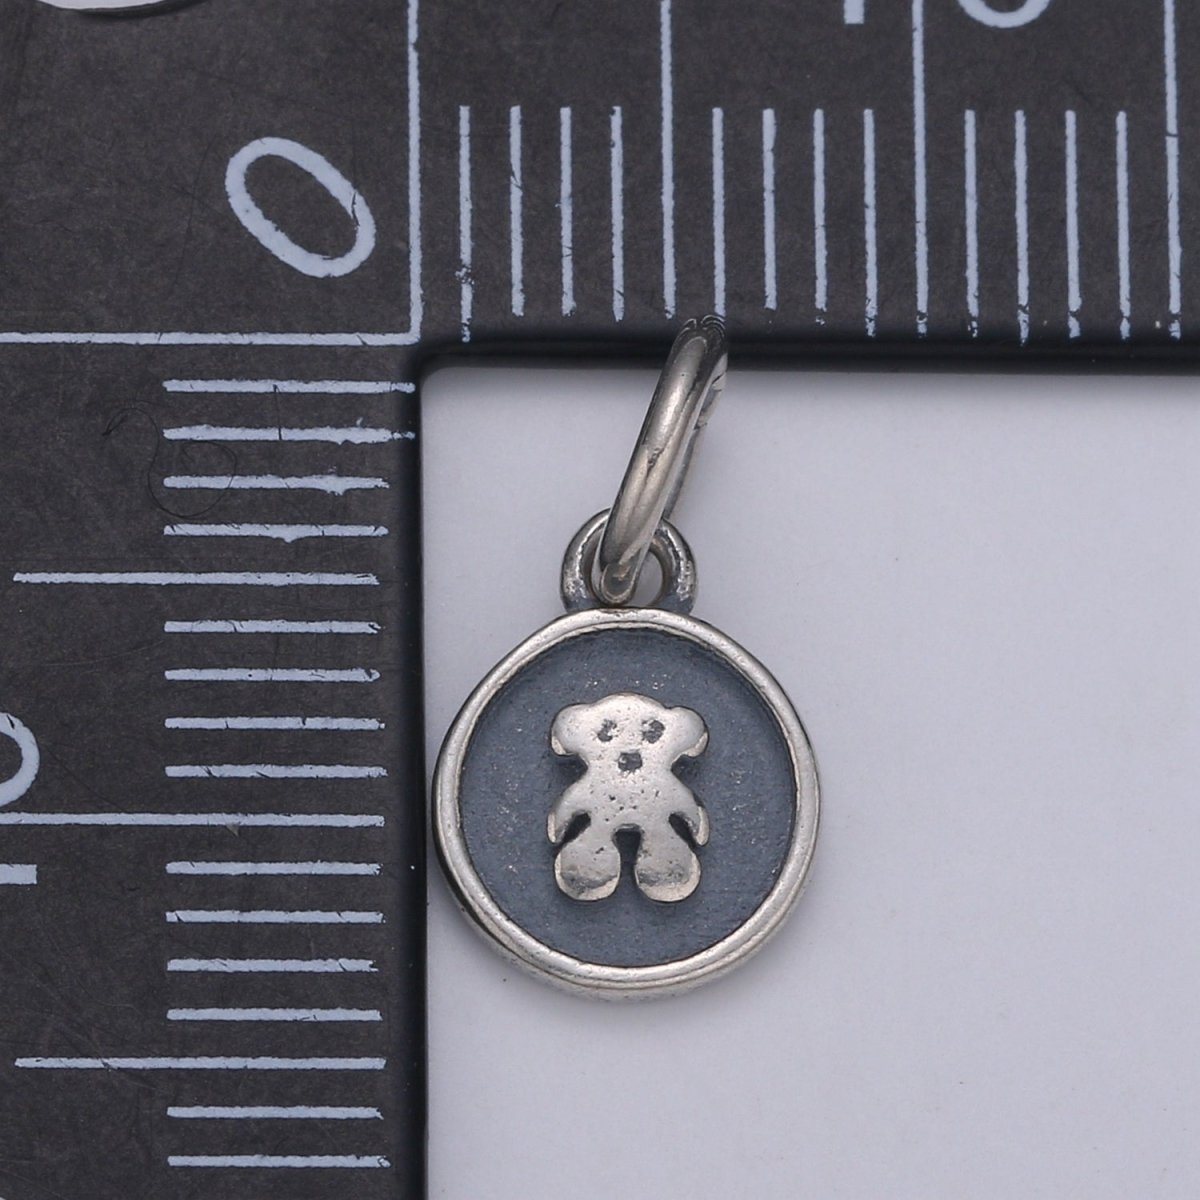 925 Sterling Silver Teddy Bear Charm, Antique Silver Bear Charm Circle Round Disc Charm for Necklace Bracelet Earring, Cute Charm SL-153 - DLUXCA